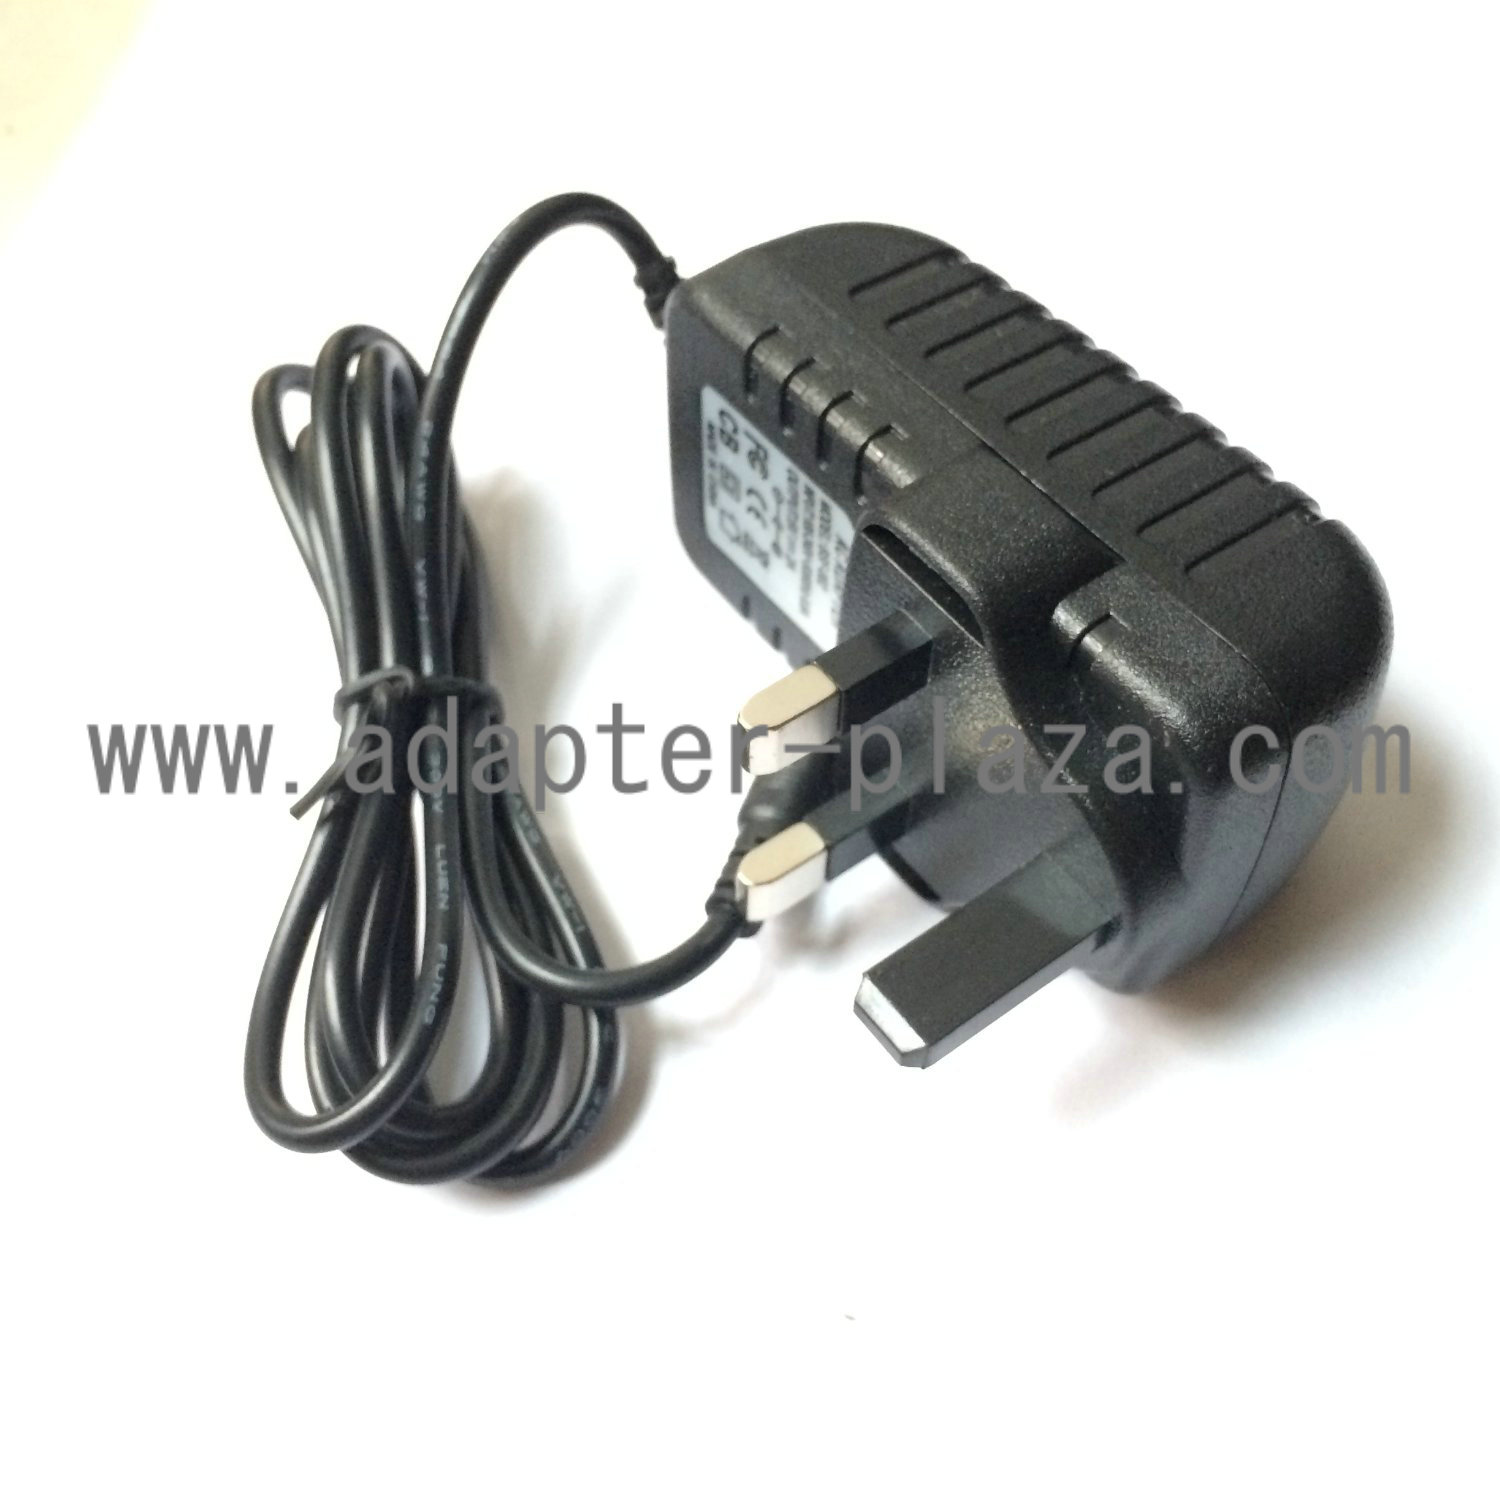 Brand New 9V 1.0A AC/DC Adapter For Casio LK-110 LK-33 Keyboard Charger Power Supply - Click Image to Close